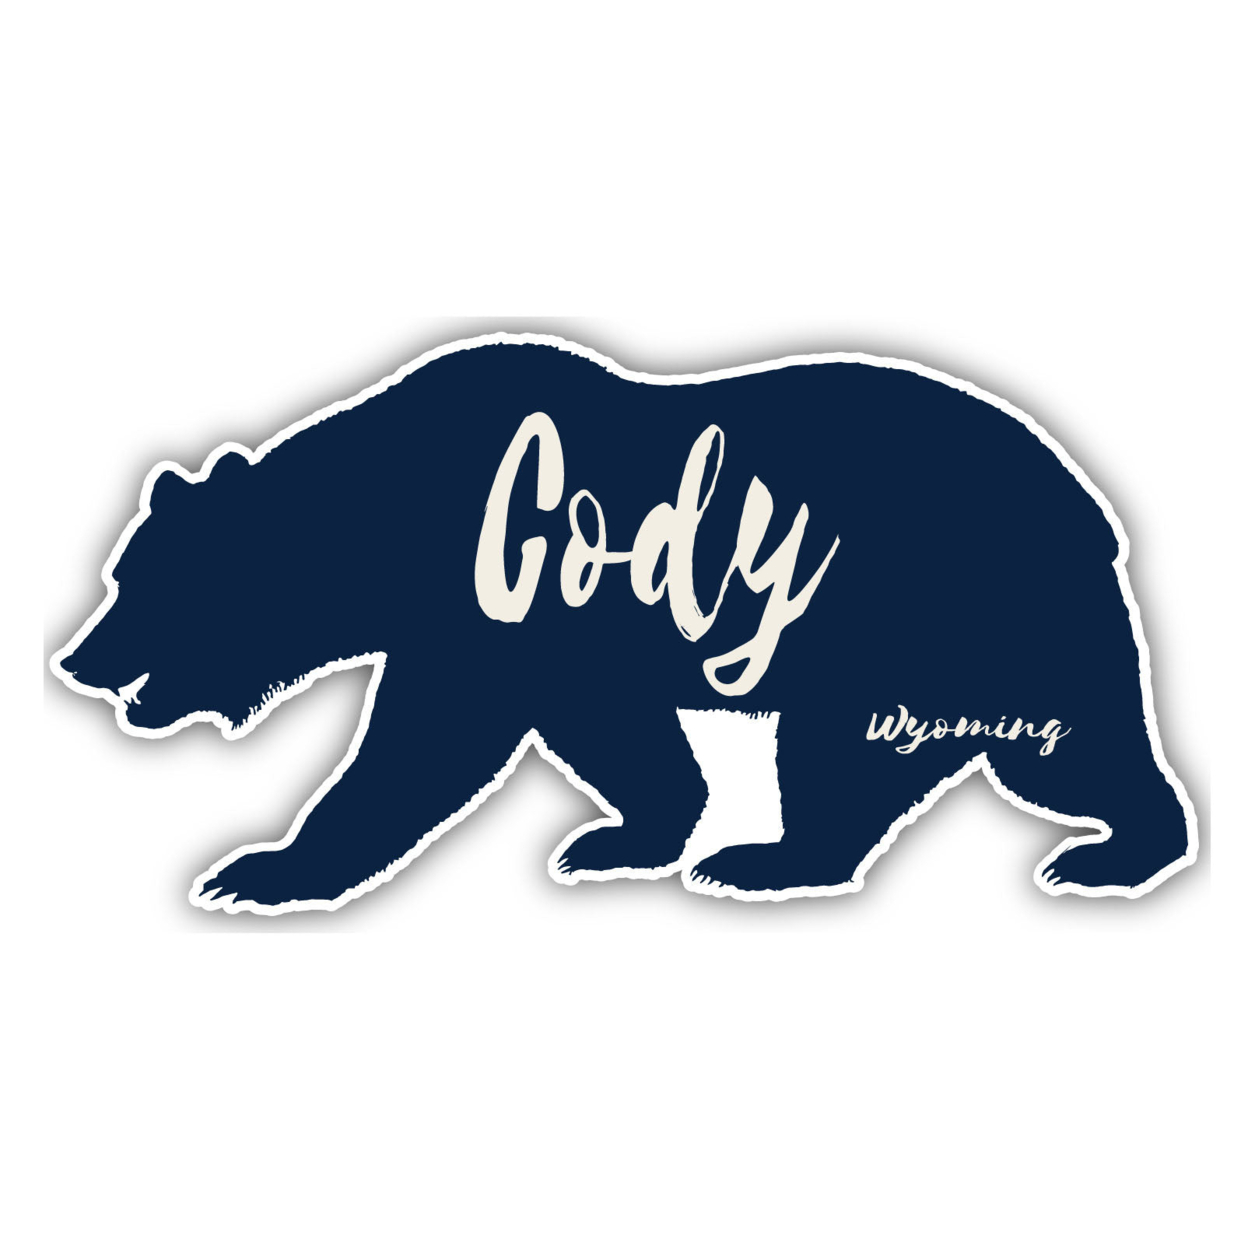 Cody Wyoming Souvenir Decorative Stickers (Choose Theme And Size) - 4-Pack, 10-Inch, Bear